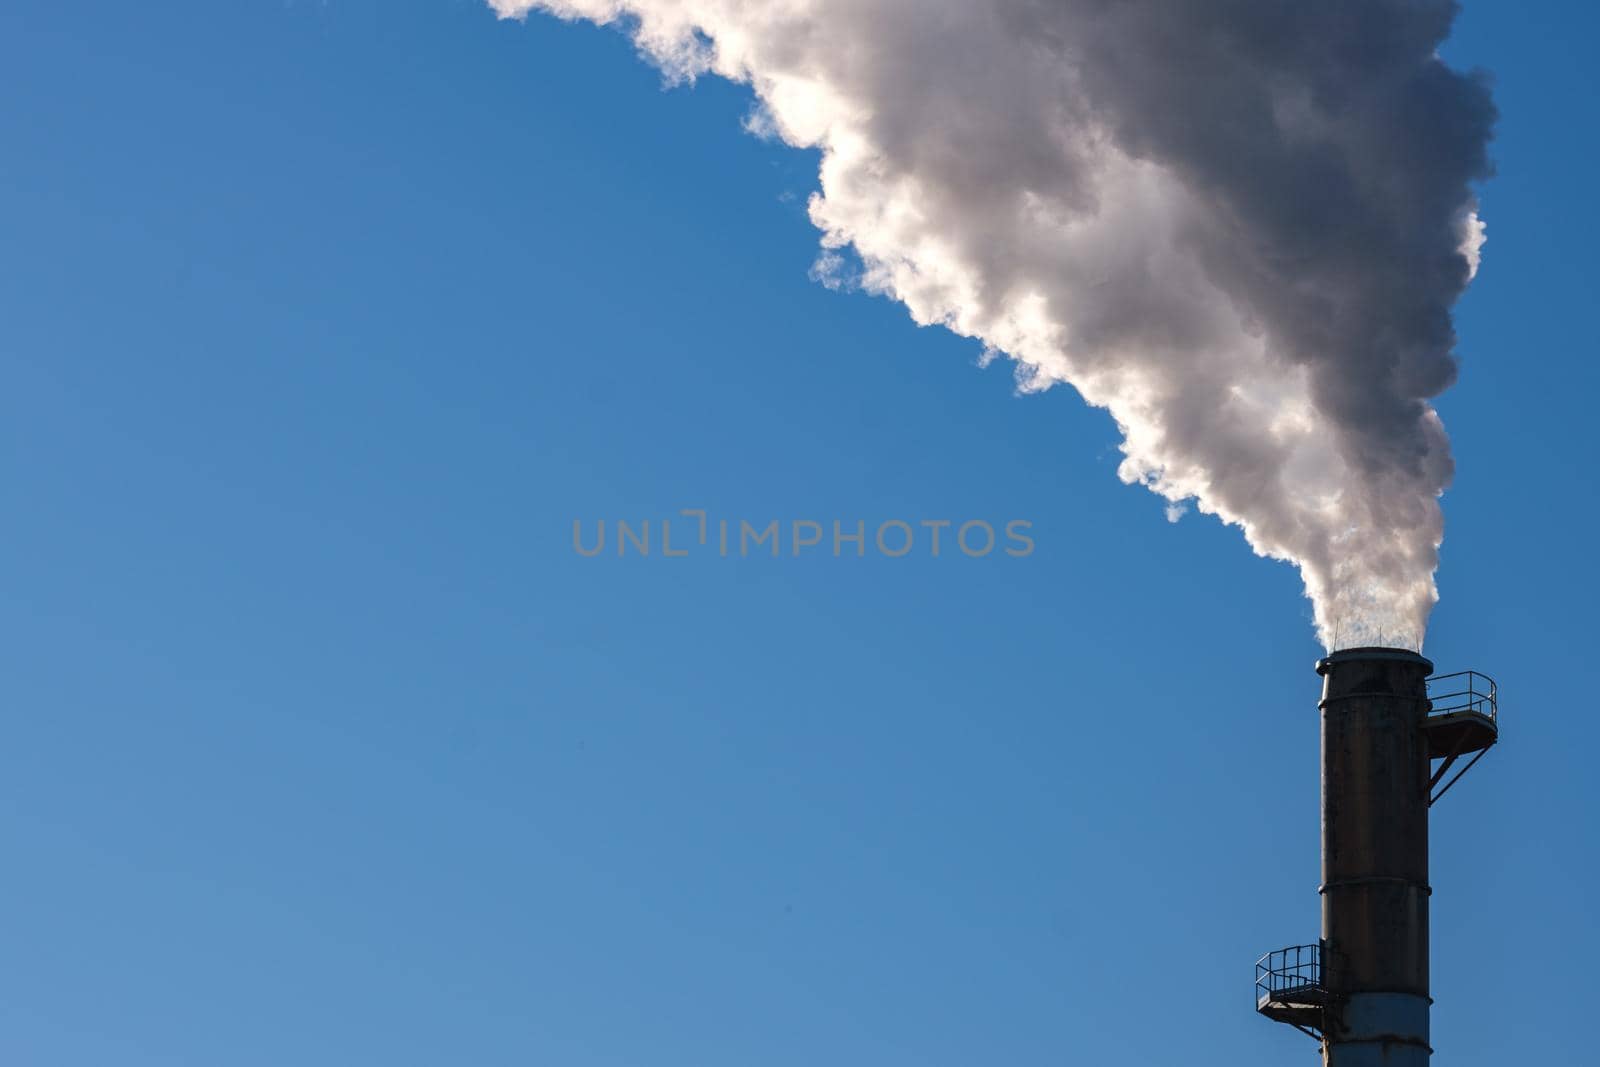 Thick smoke billows into a clear blue sky from the top of a tall smokestack.